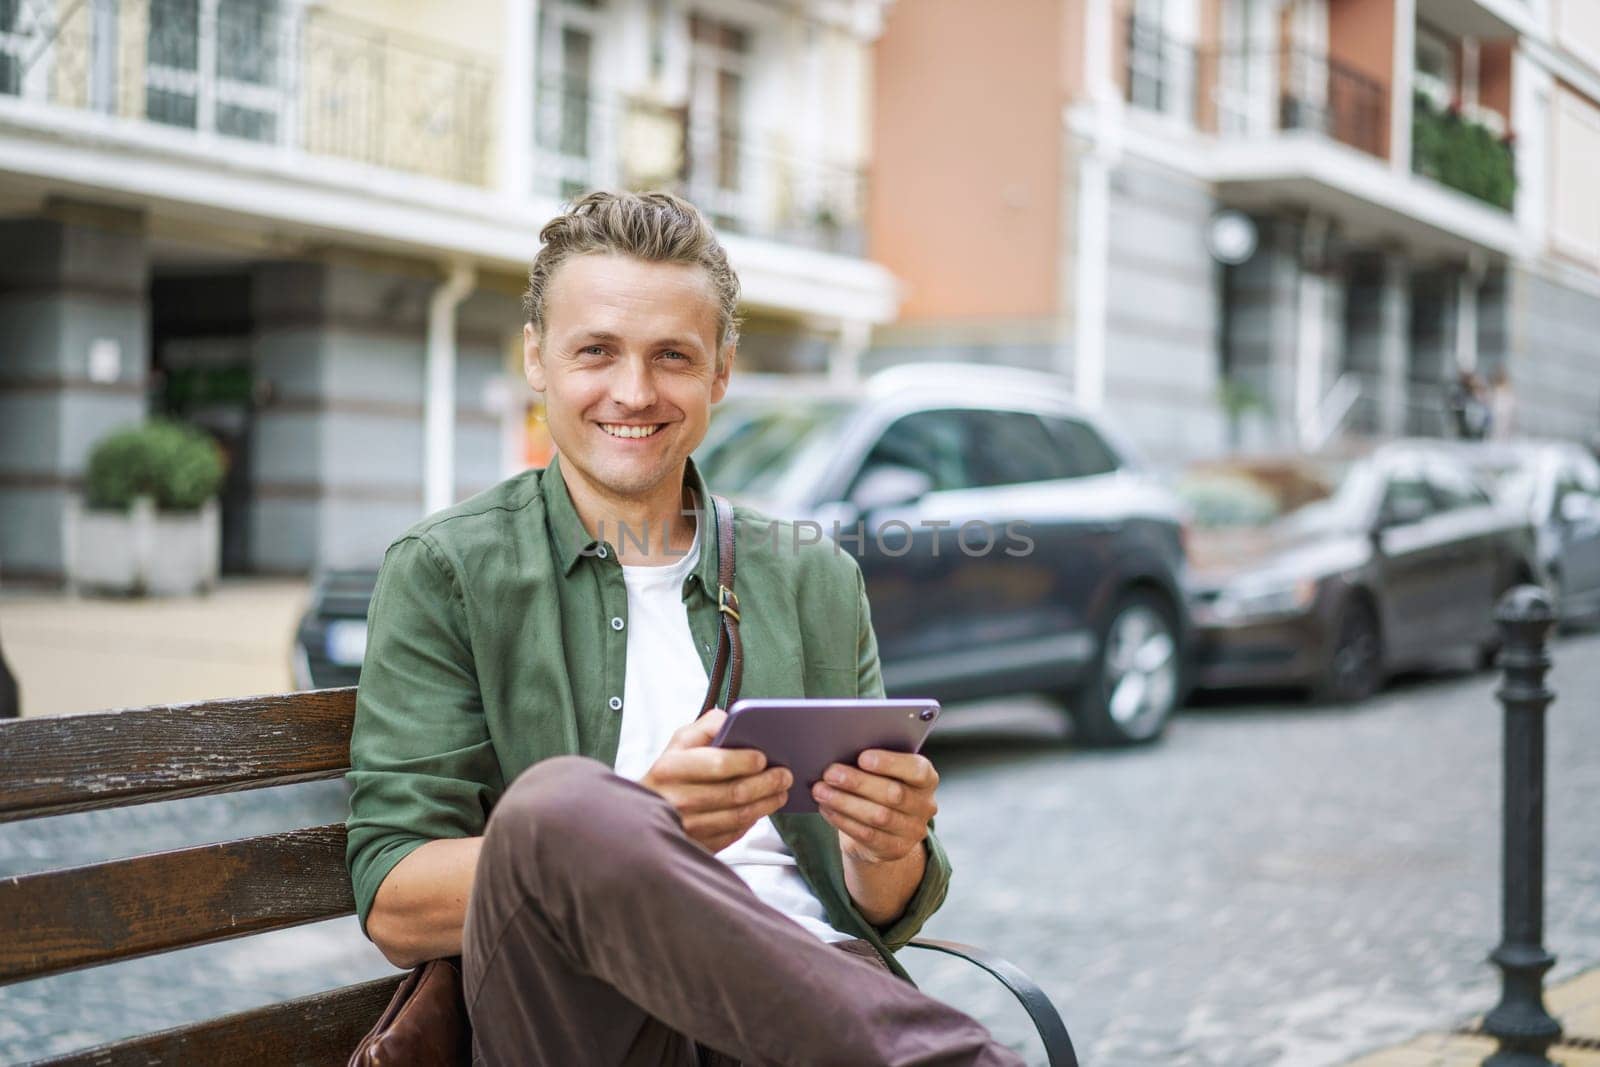 Integration of technology into everyday life, as man utilizes digital devices for information and communication. Blond man searching for information on internet using tablet PC on bench in city street. . High quality photo